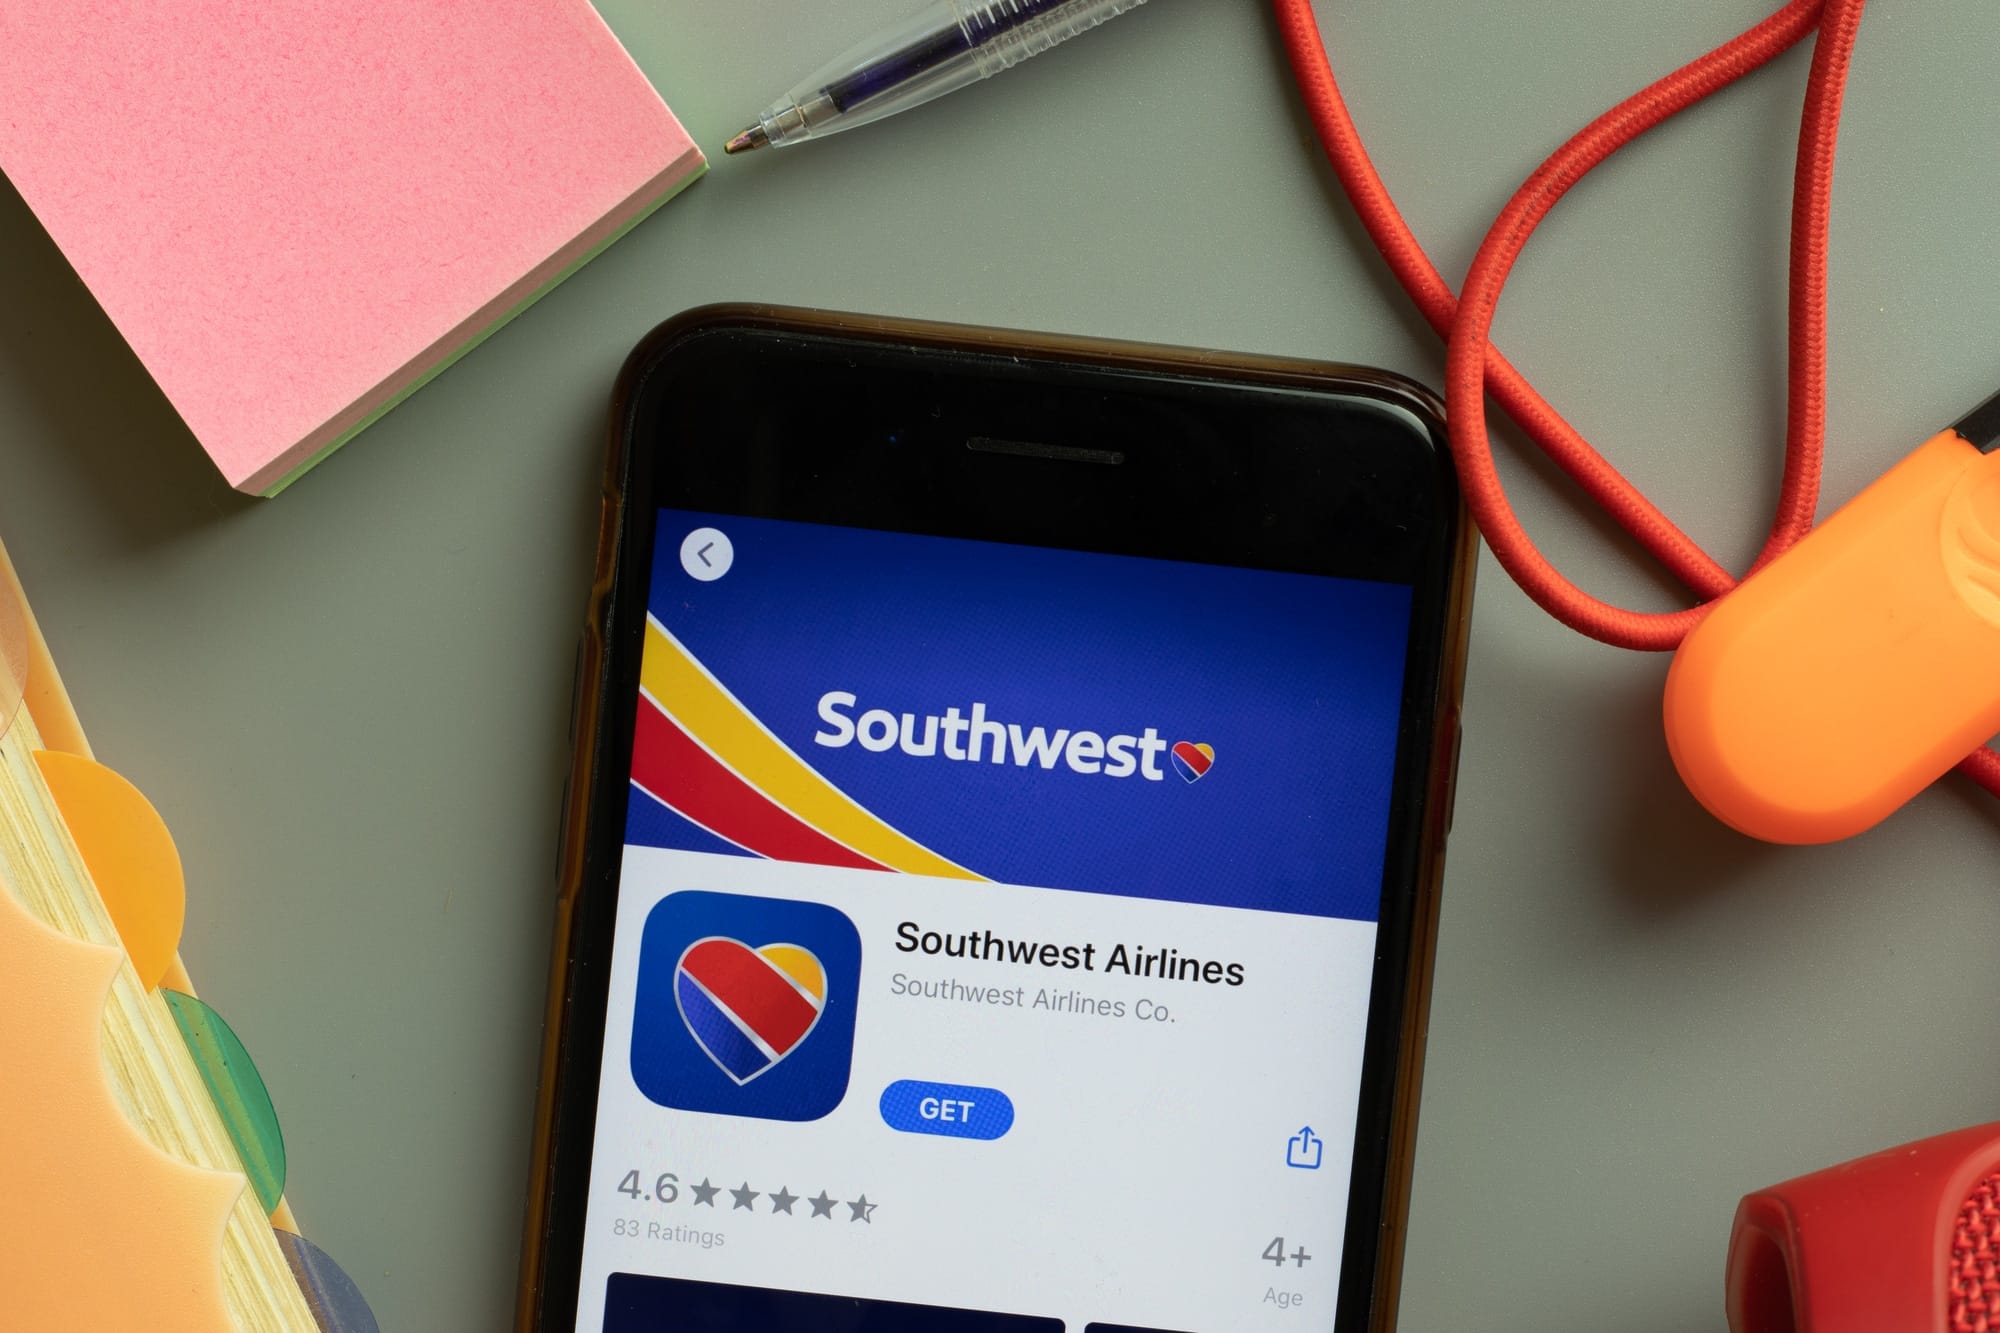 southwest-airlines-swot-analysis-strengths threats